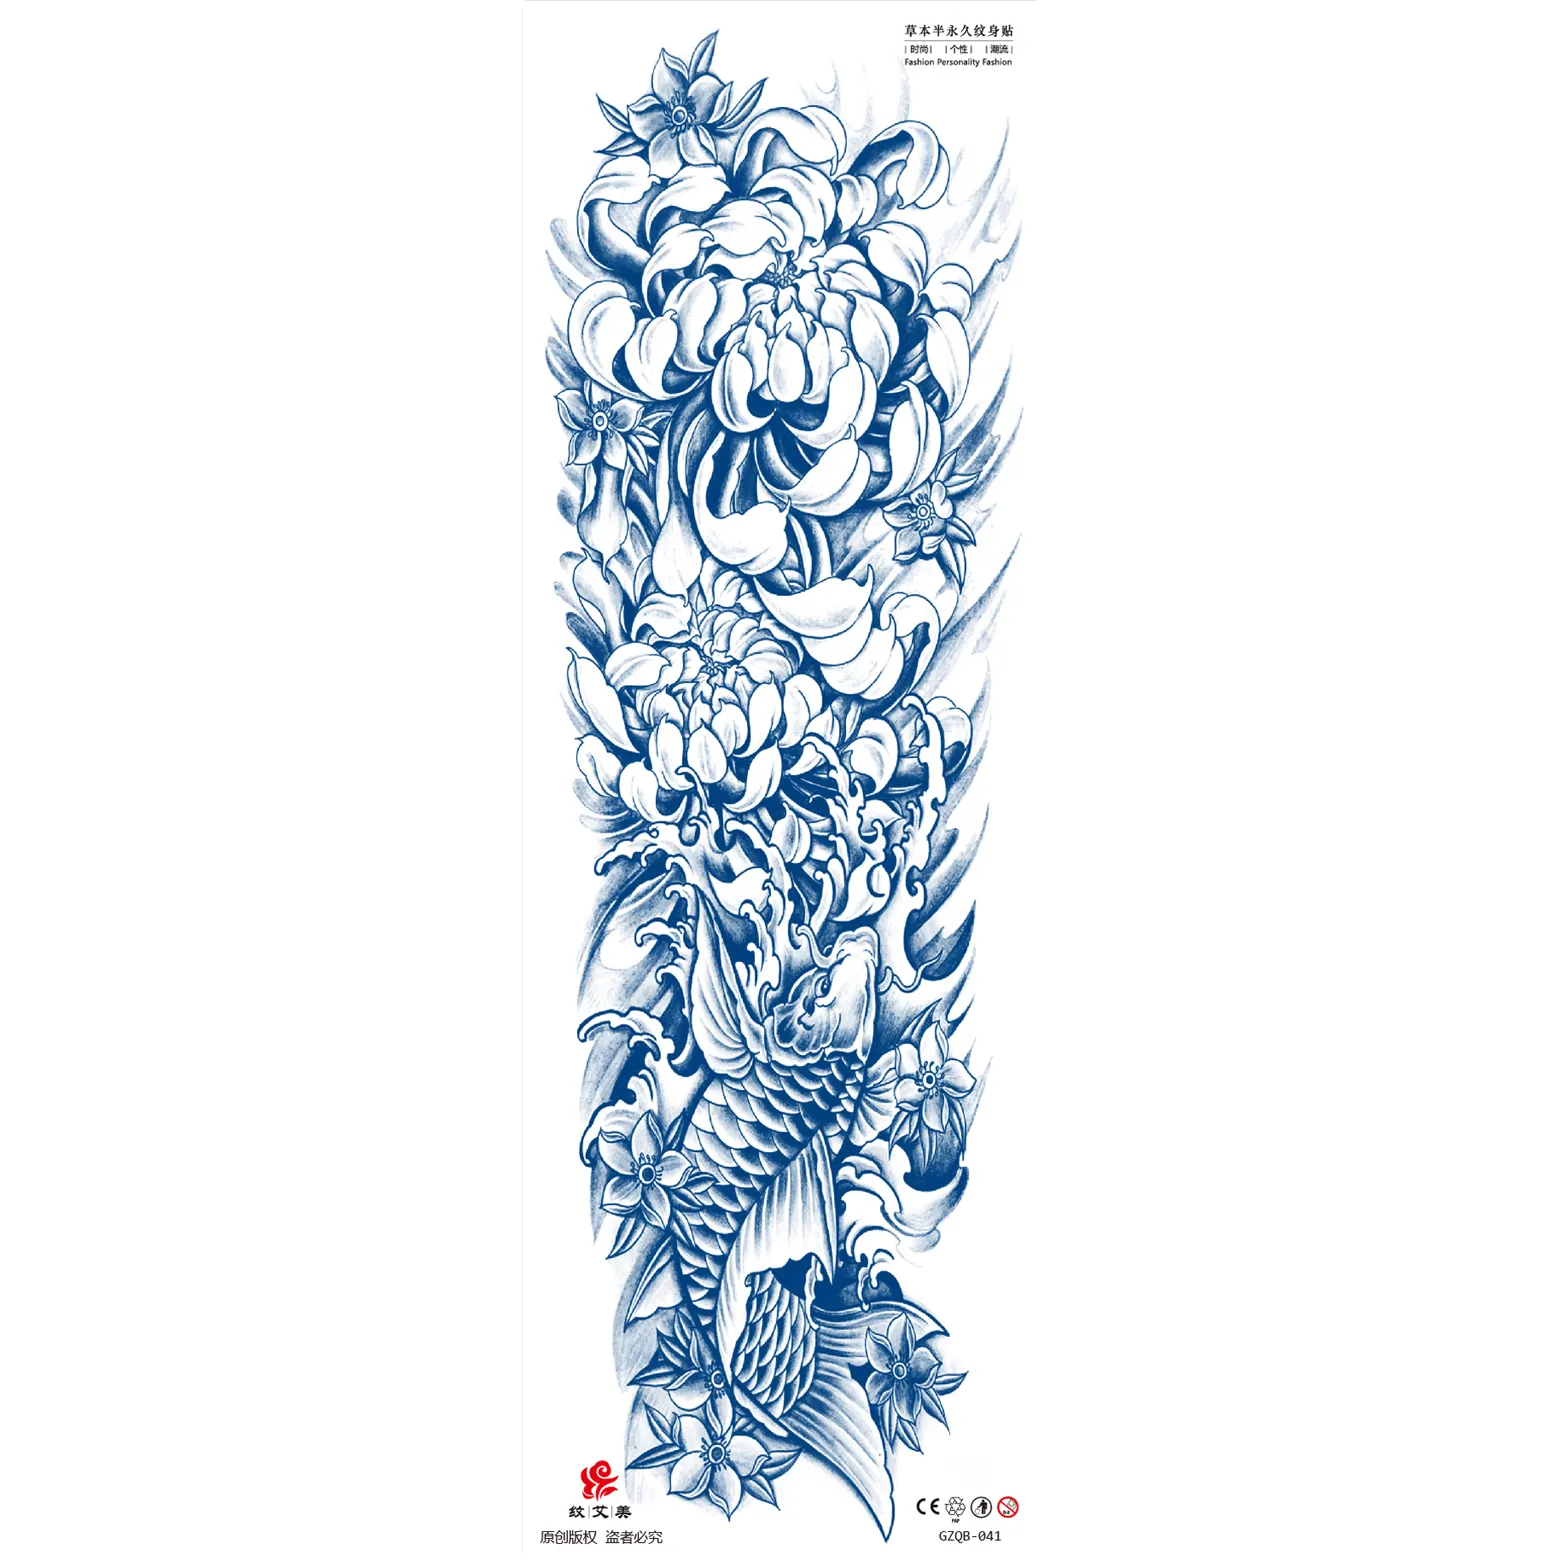 GZQB41-52 Cosmetic Grade New Design Large Image Temporary Fruit Juice Herb Tattoo Sticker For Full Arm